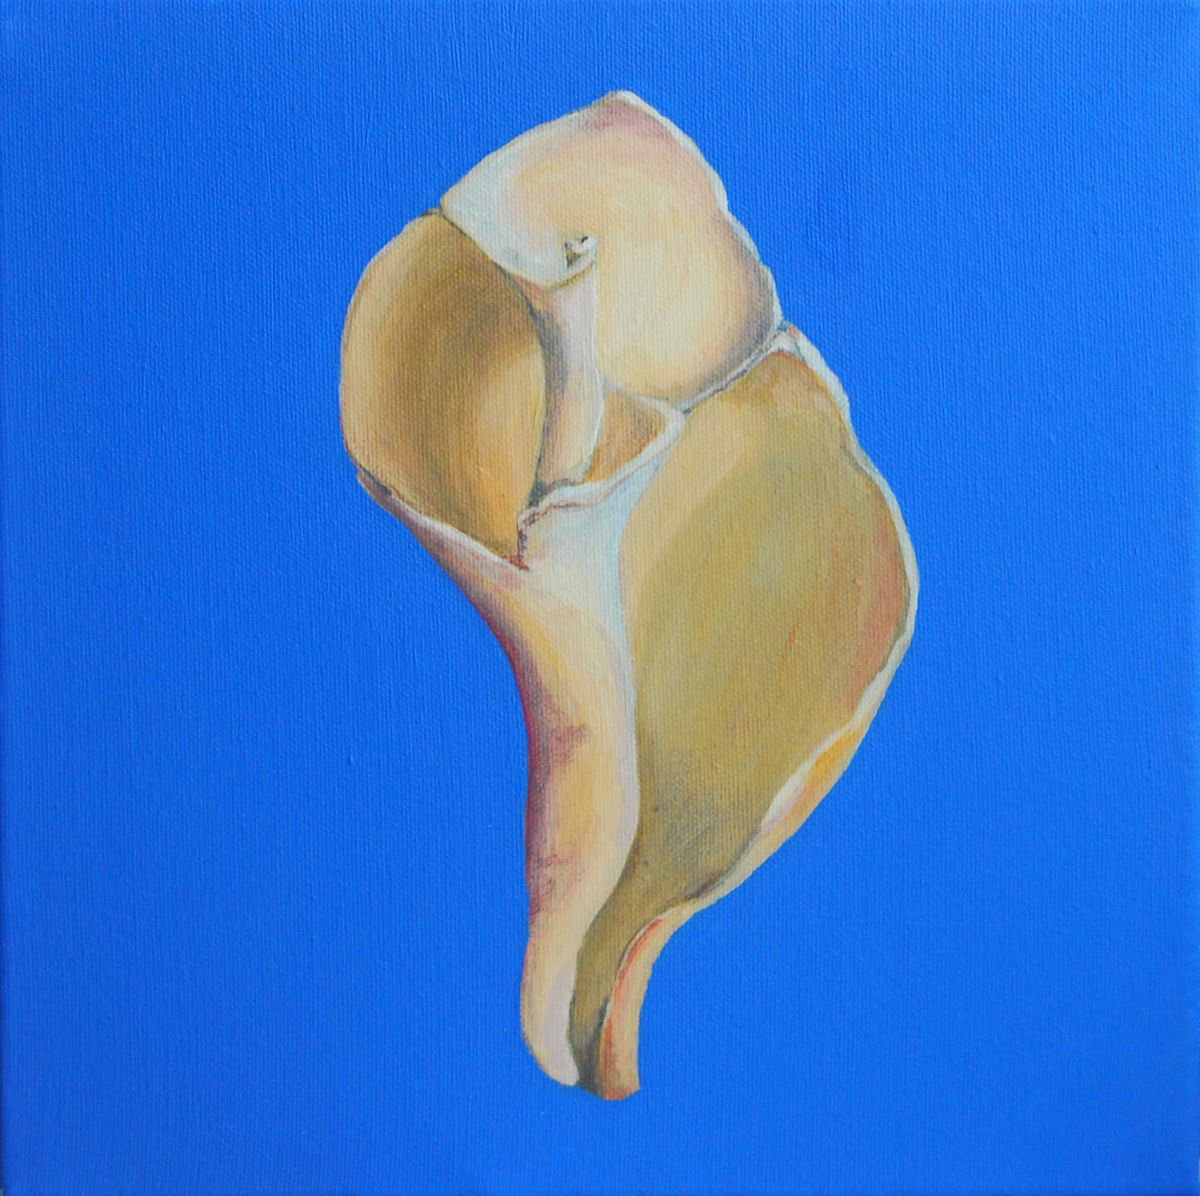 Whelk Shell #2 - Square Minimal Contemporary Painting Inspired by Georgia O